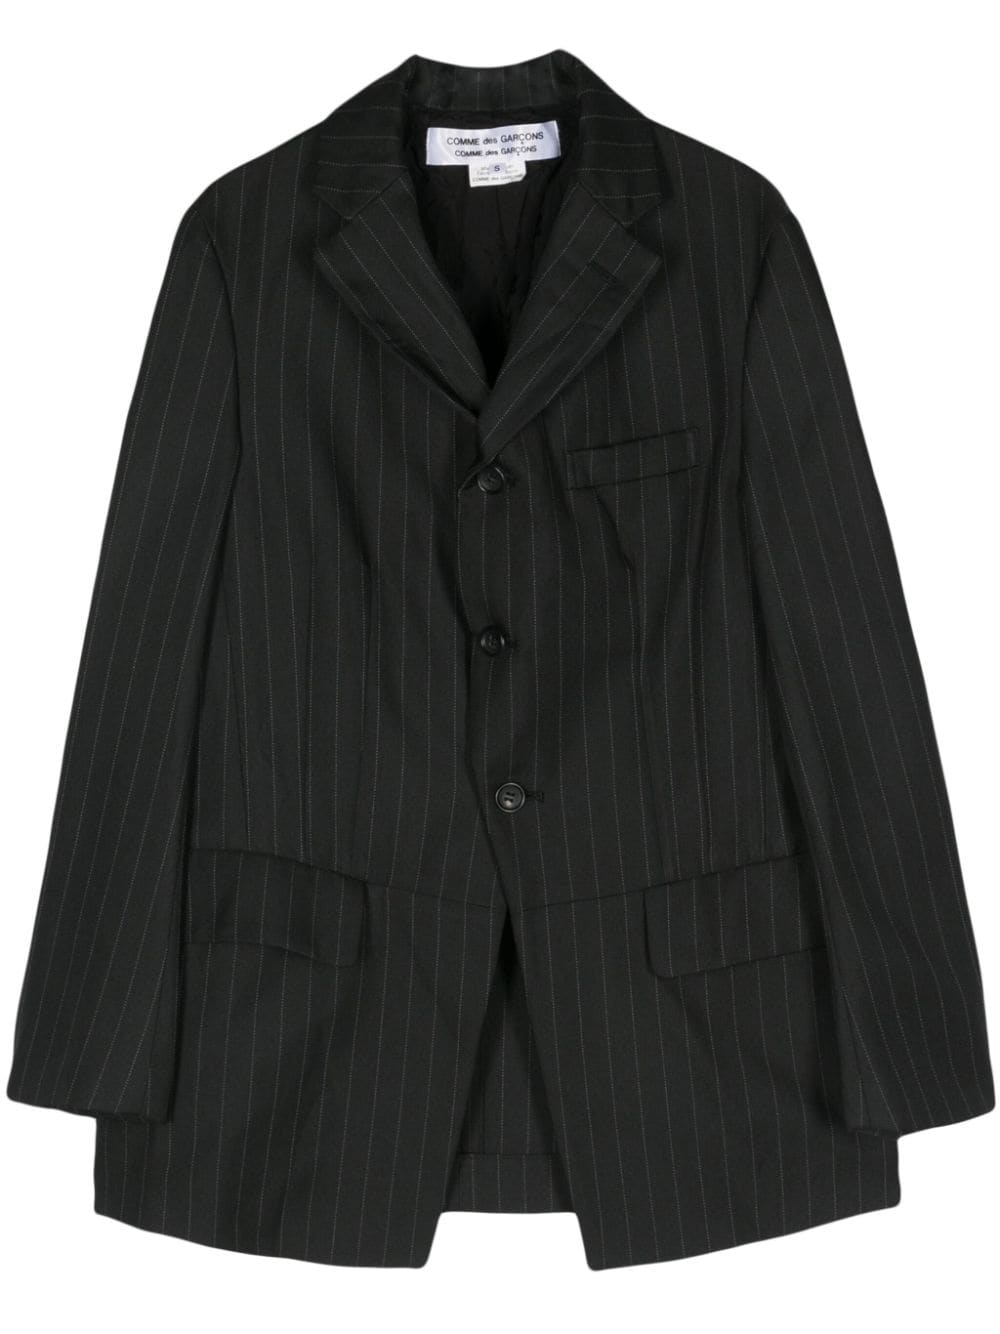 COMME DES GARÇONS Black Single-Breasted Jacket with Pinstripe Pattern and Notched Lapels